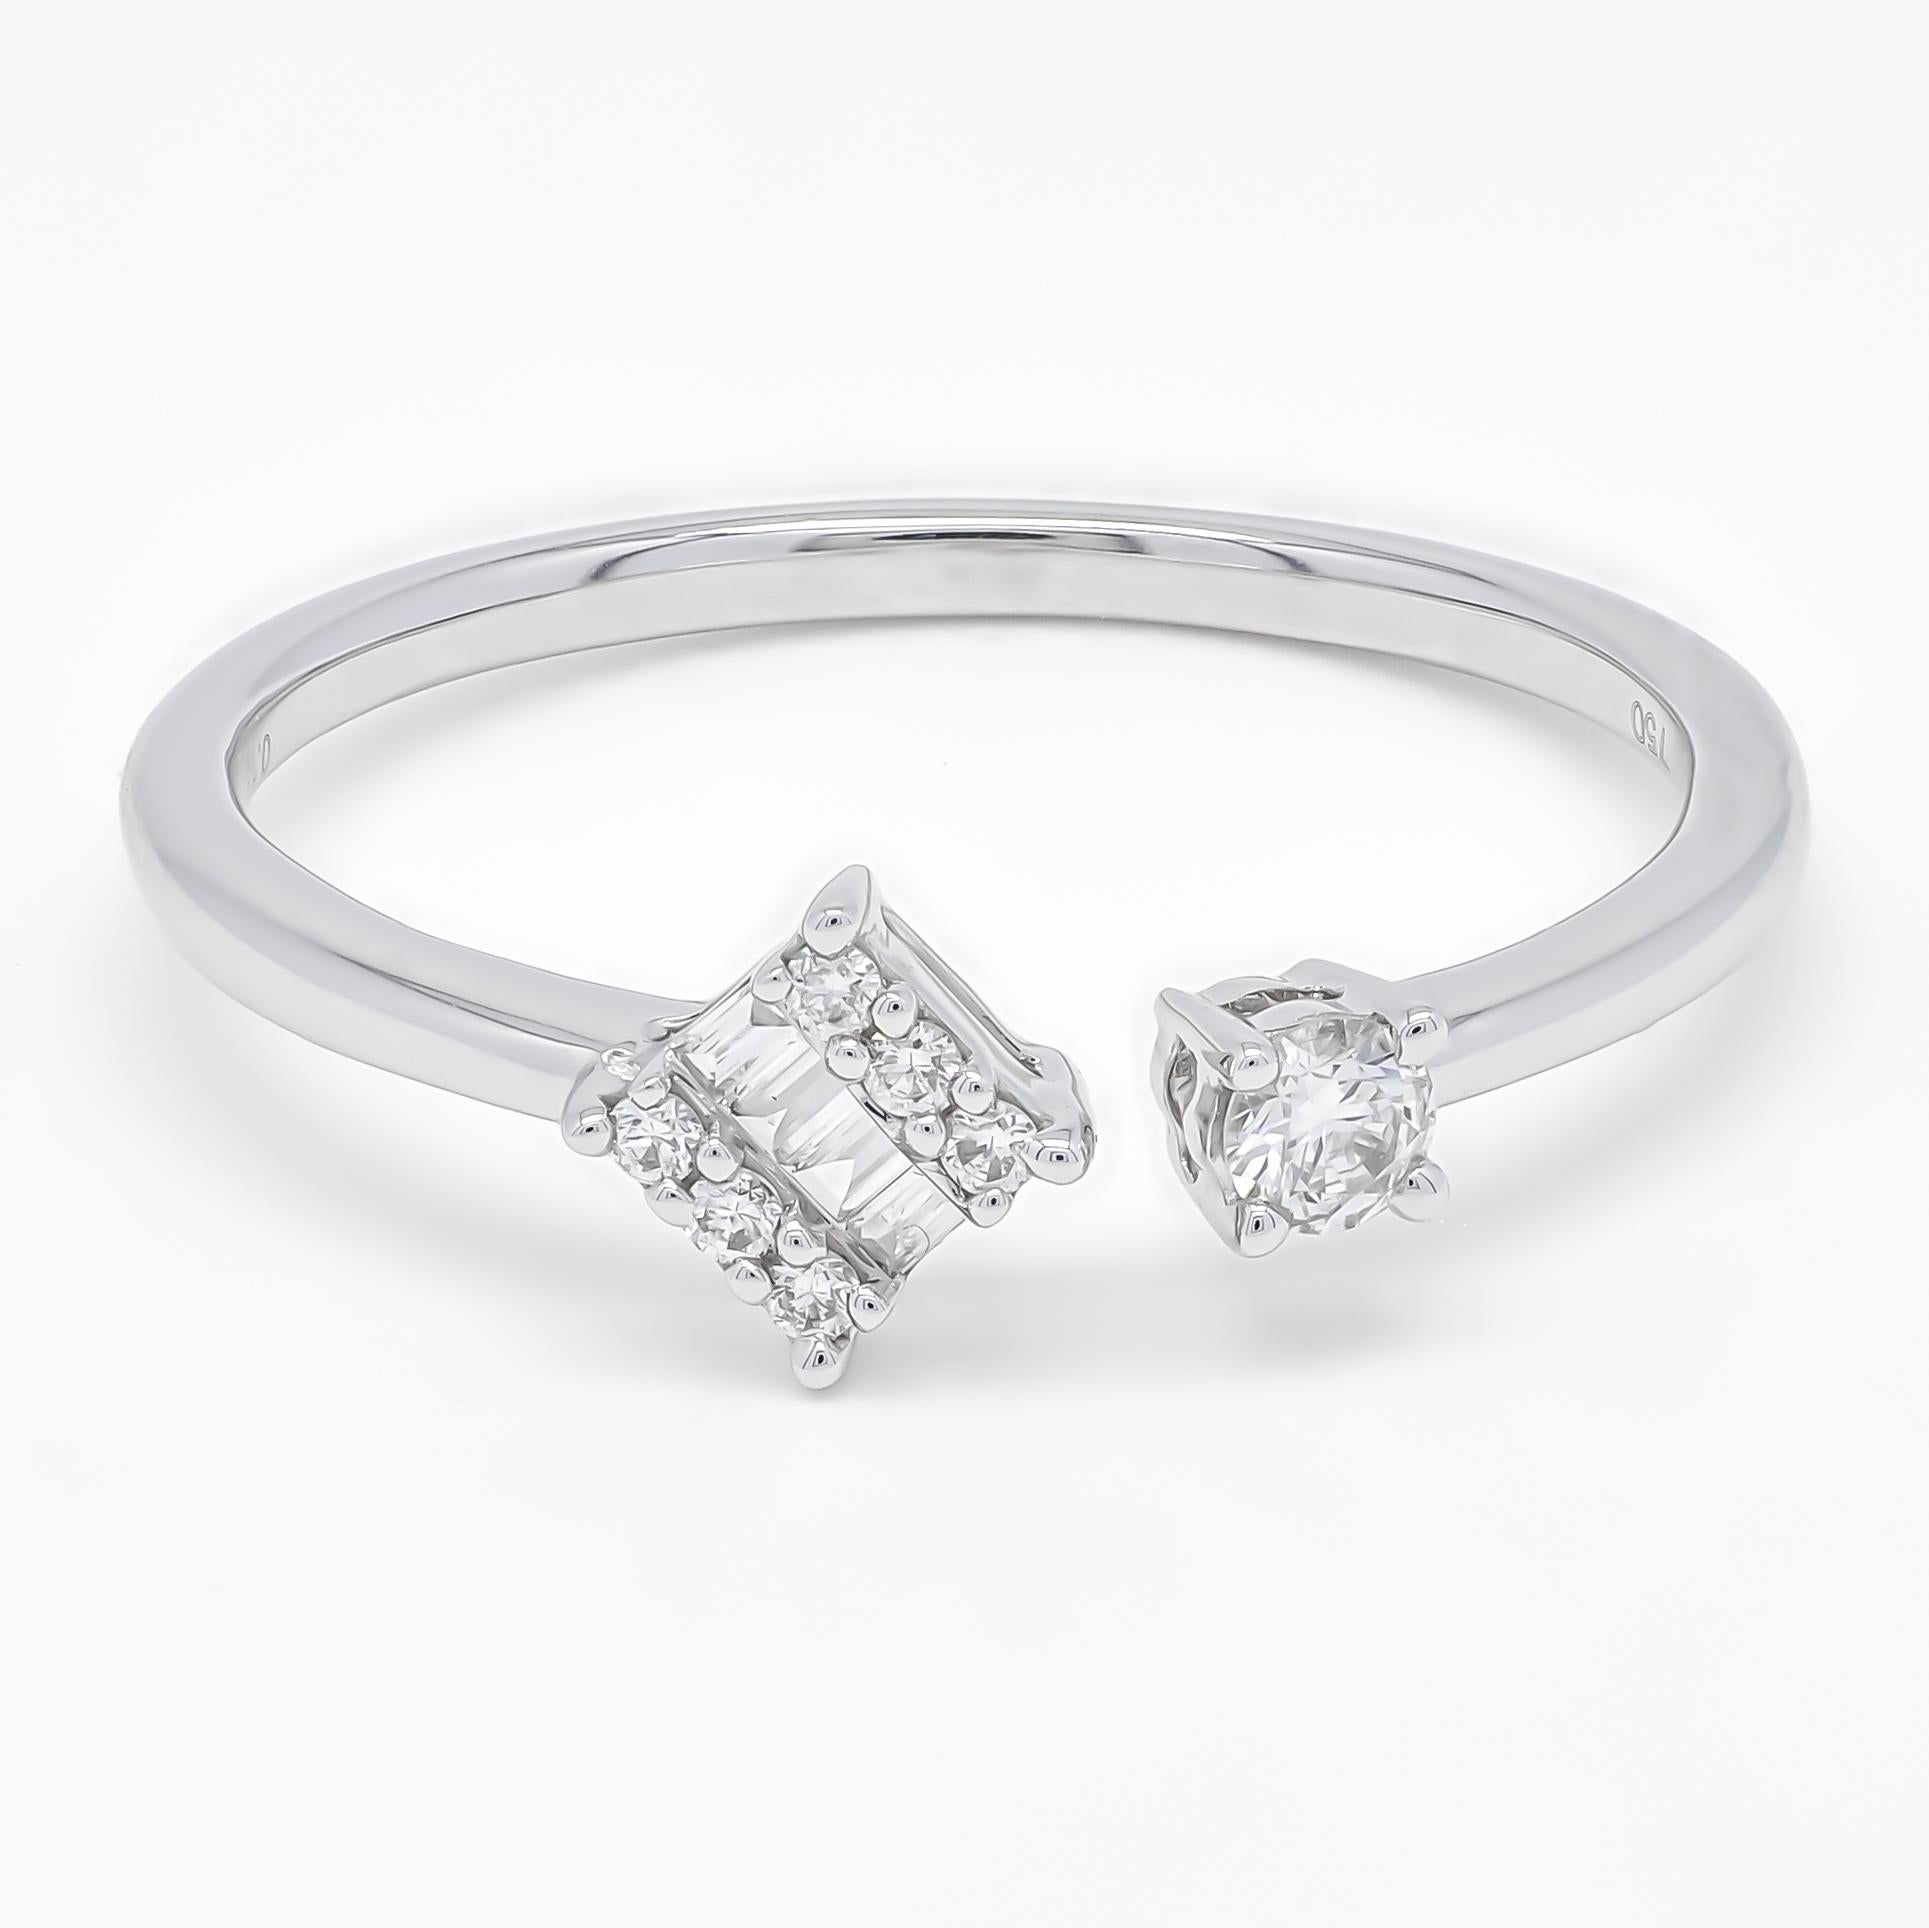 Rock it with a duo Design Ring that features an alluring Cluster set and a single solitaire diamond. Ring adorned in sparkling Diamonds and is set on an open Ring design. 

Metal: 18kt White Gold
Gemstone: Natural Diamonds
Shape: Round